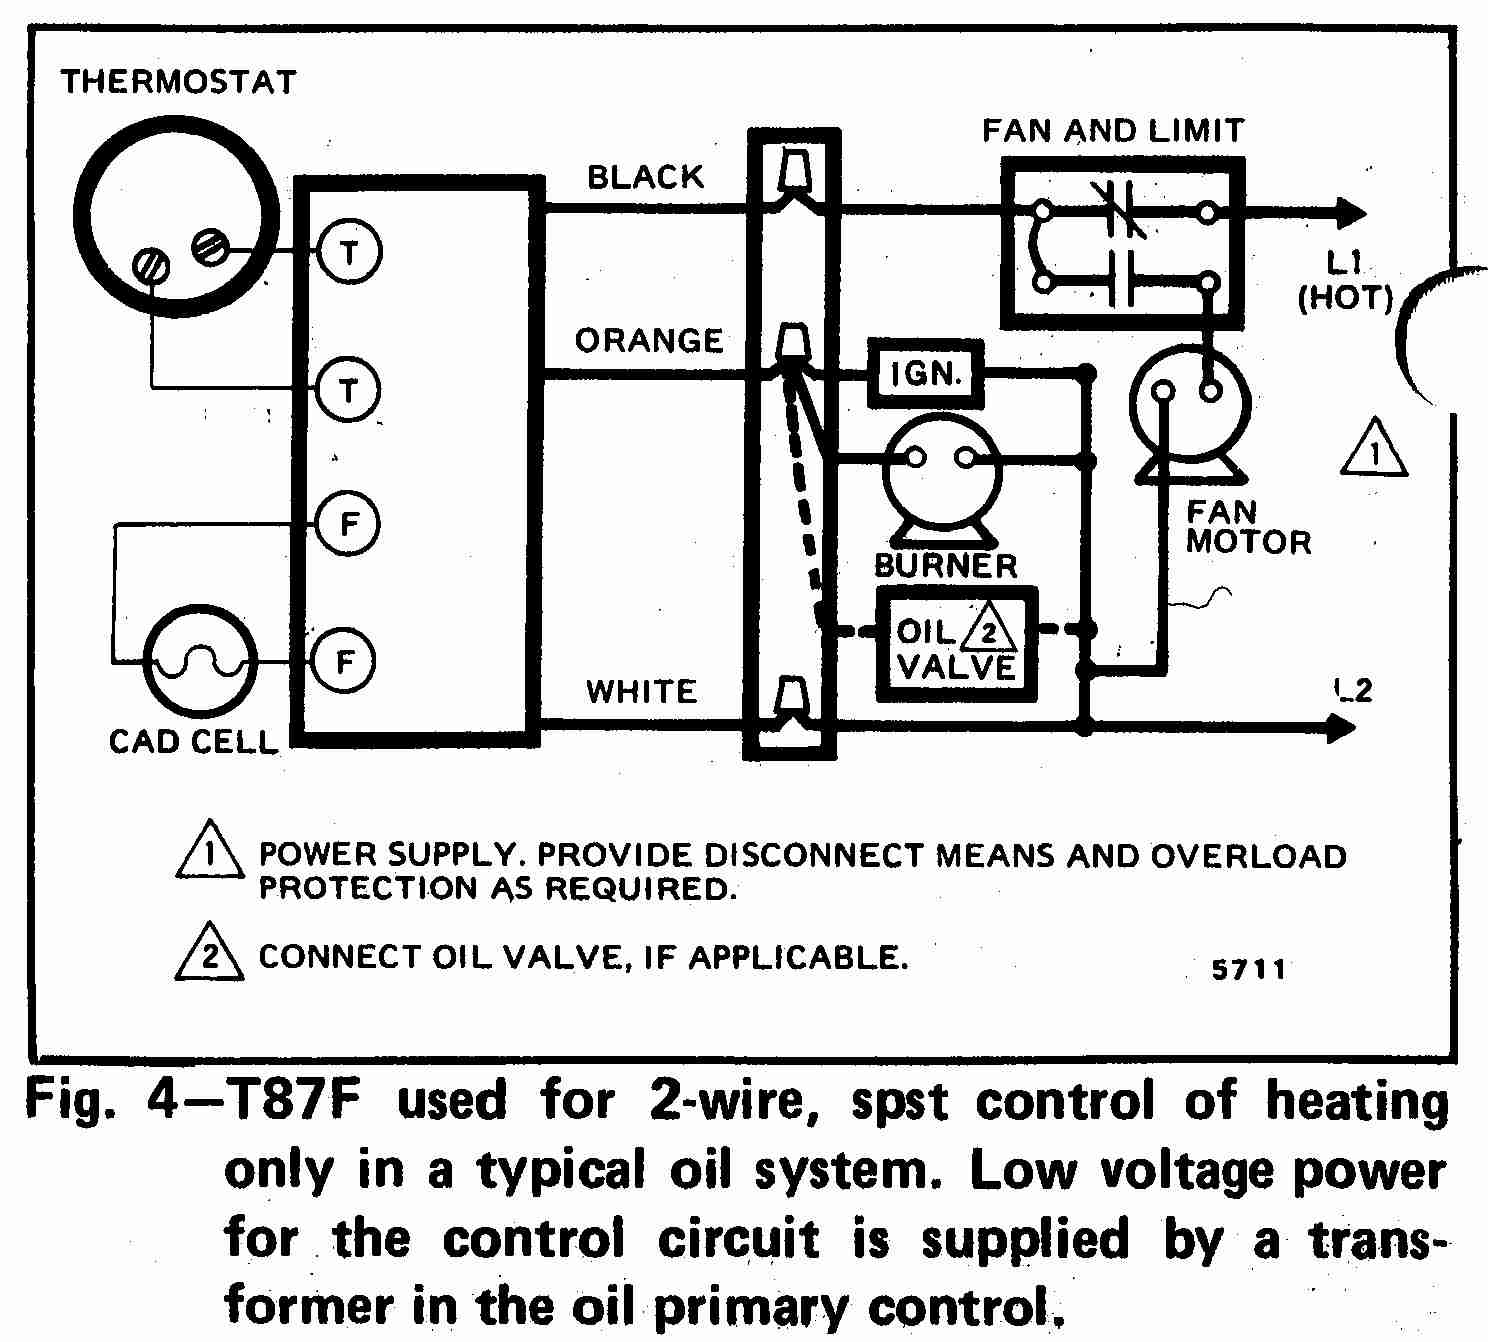 Room Thermostat Wiring Diagrams For Hvac Systems - Thermostat Wiring Diagram